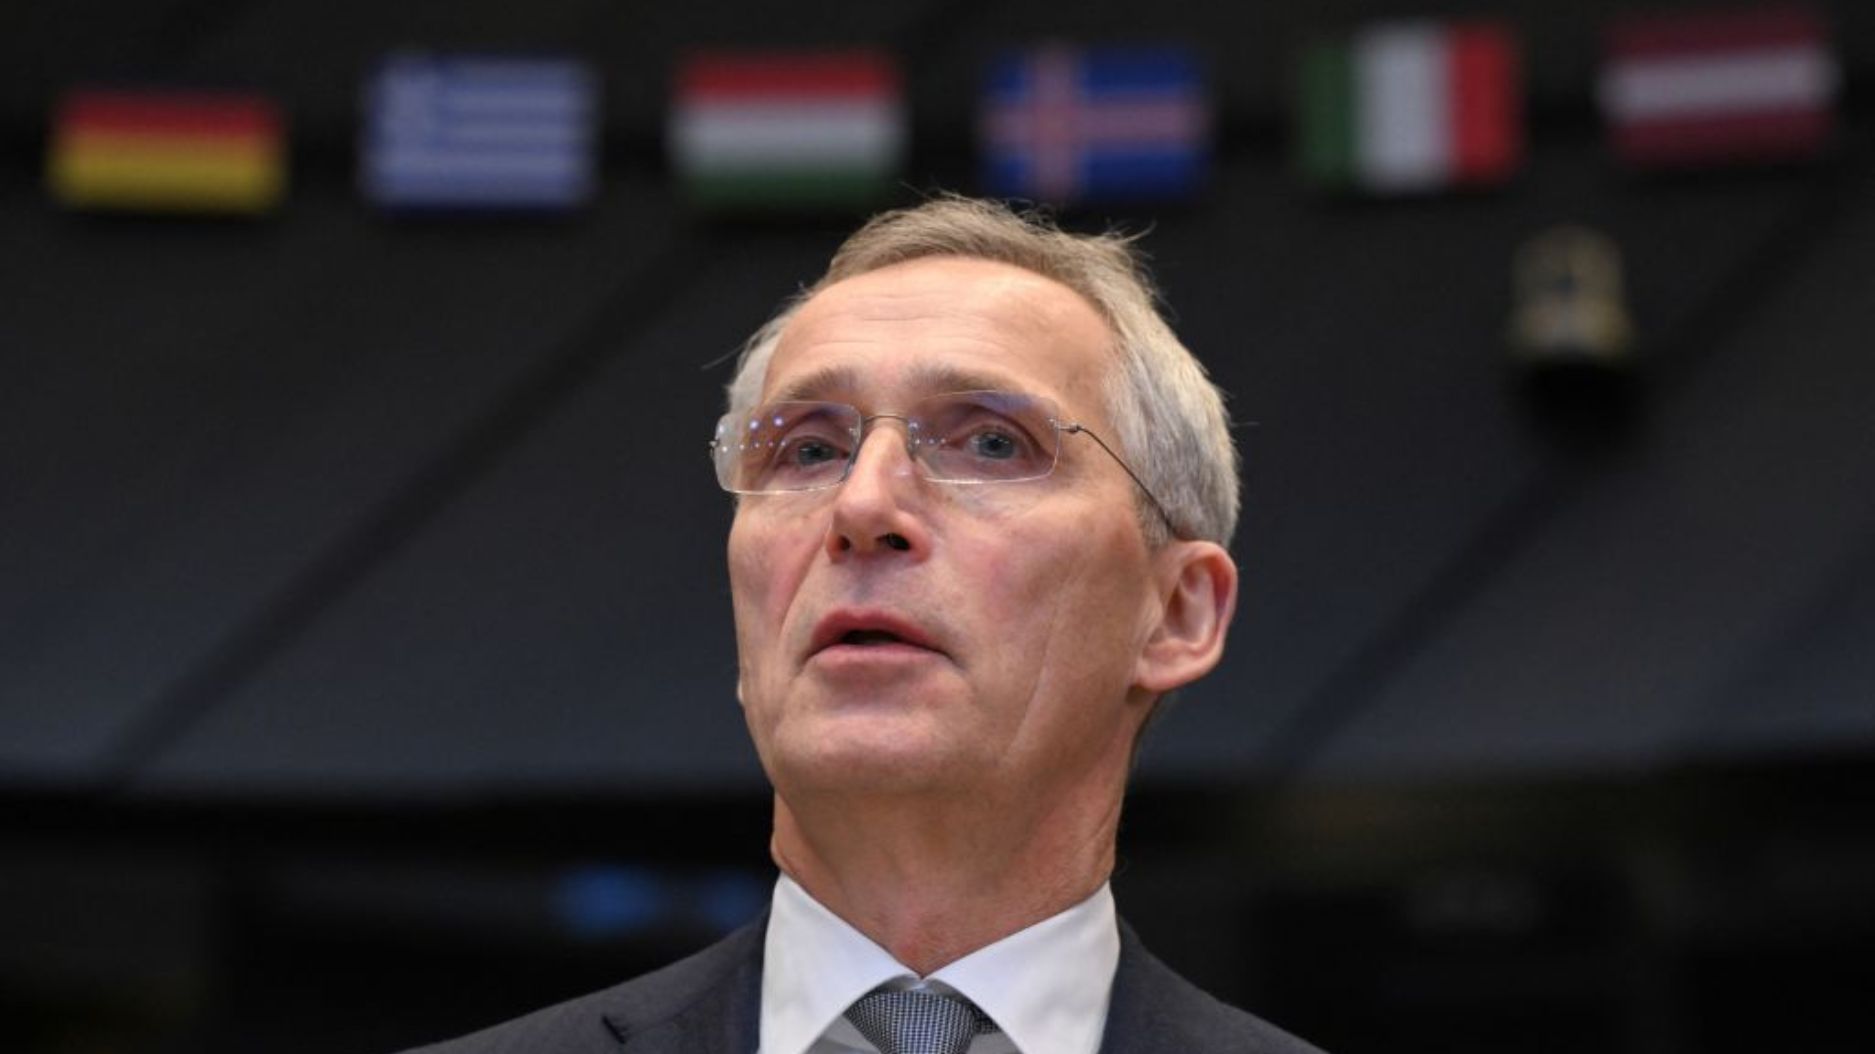 NATO calls for not taking any steps to “separate Europe from North America”